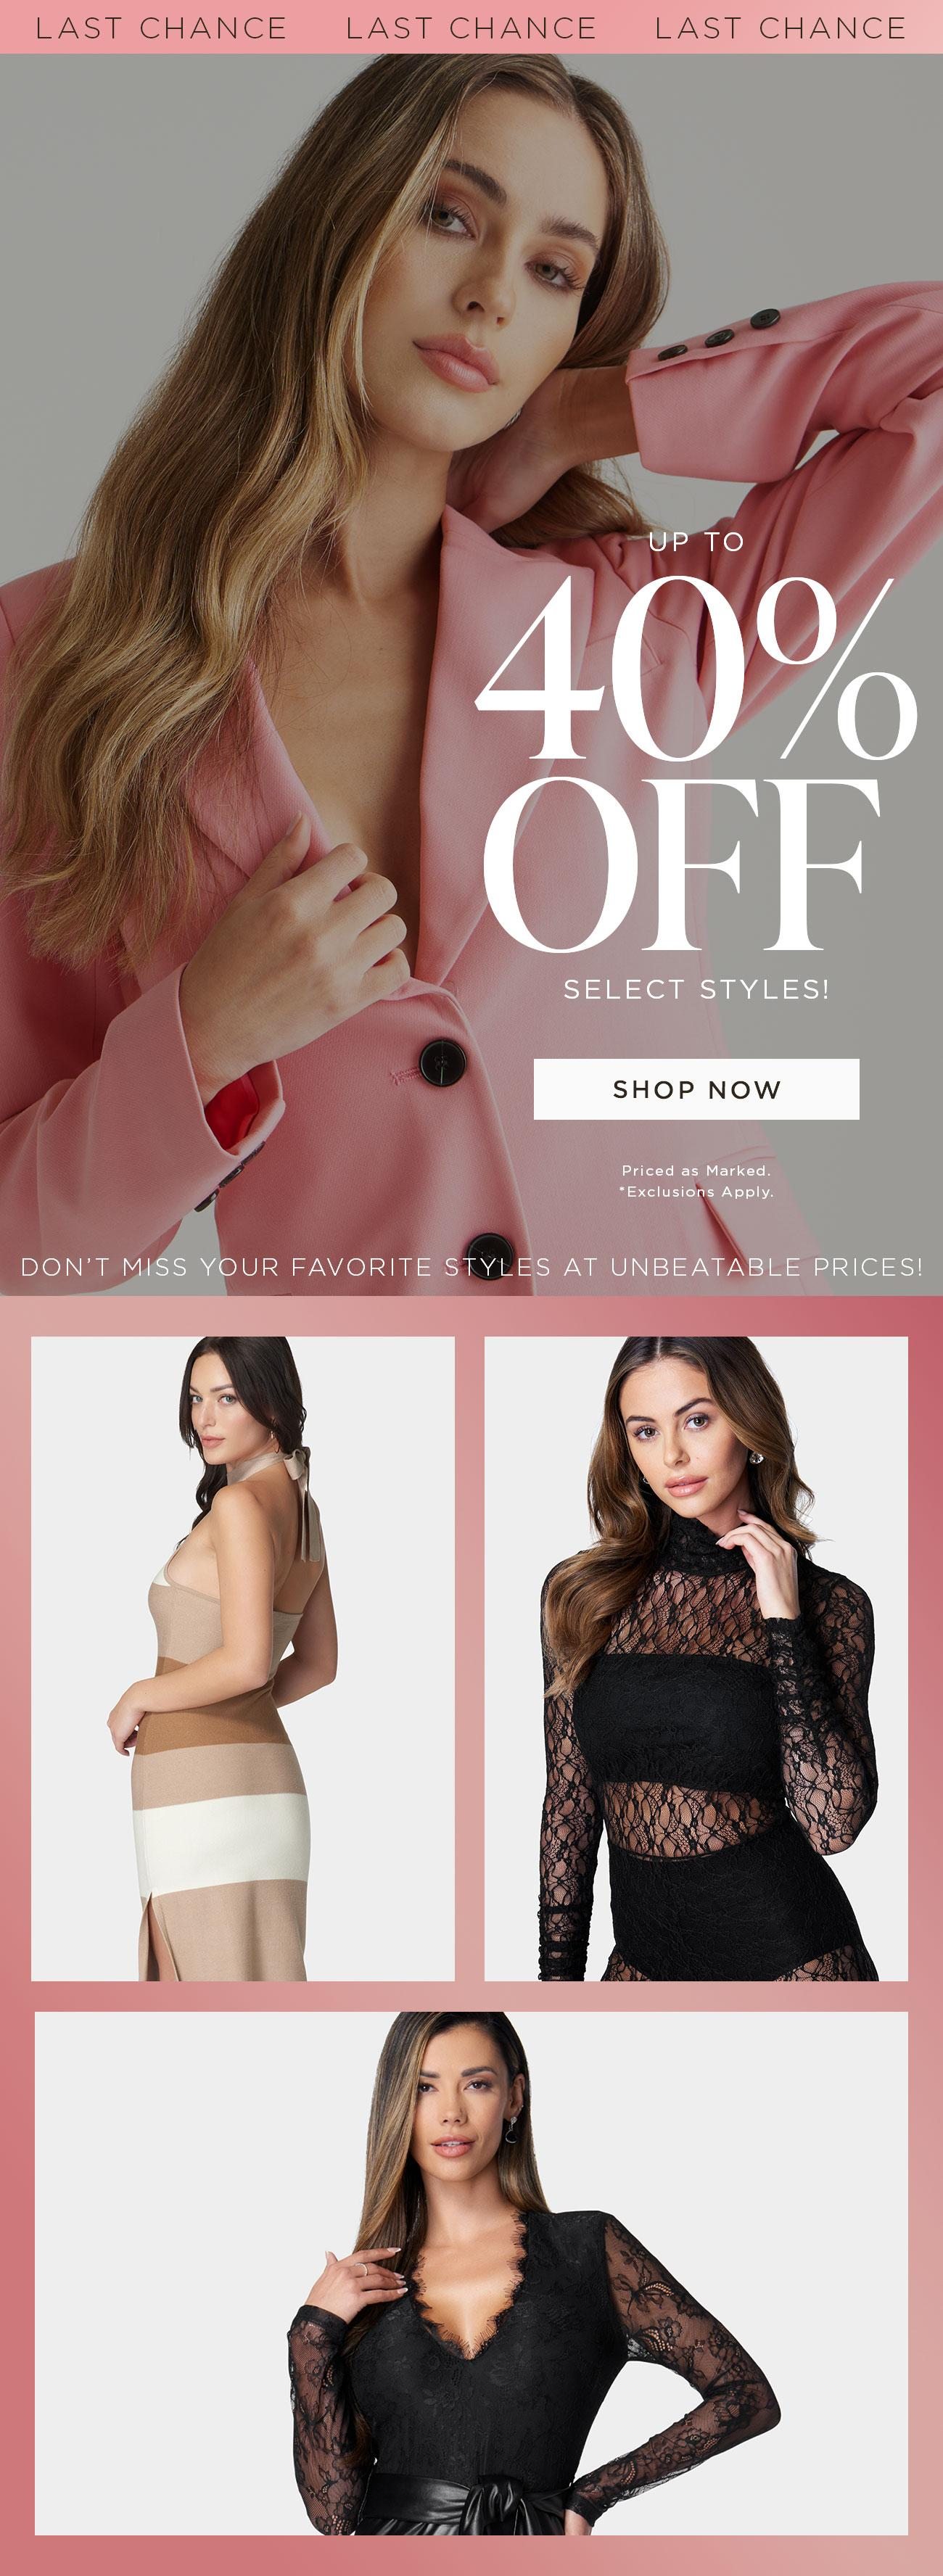 Up To 40% Off Select Styles! | Shop Now